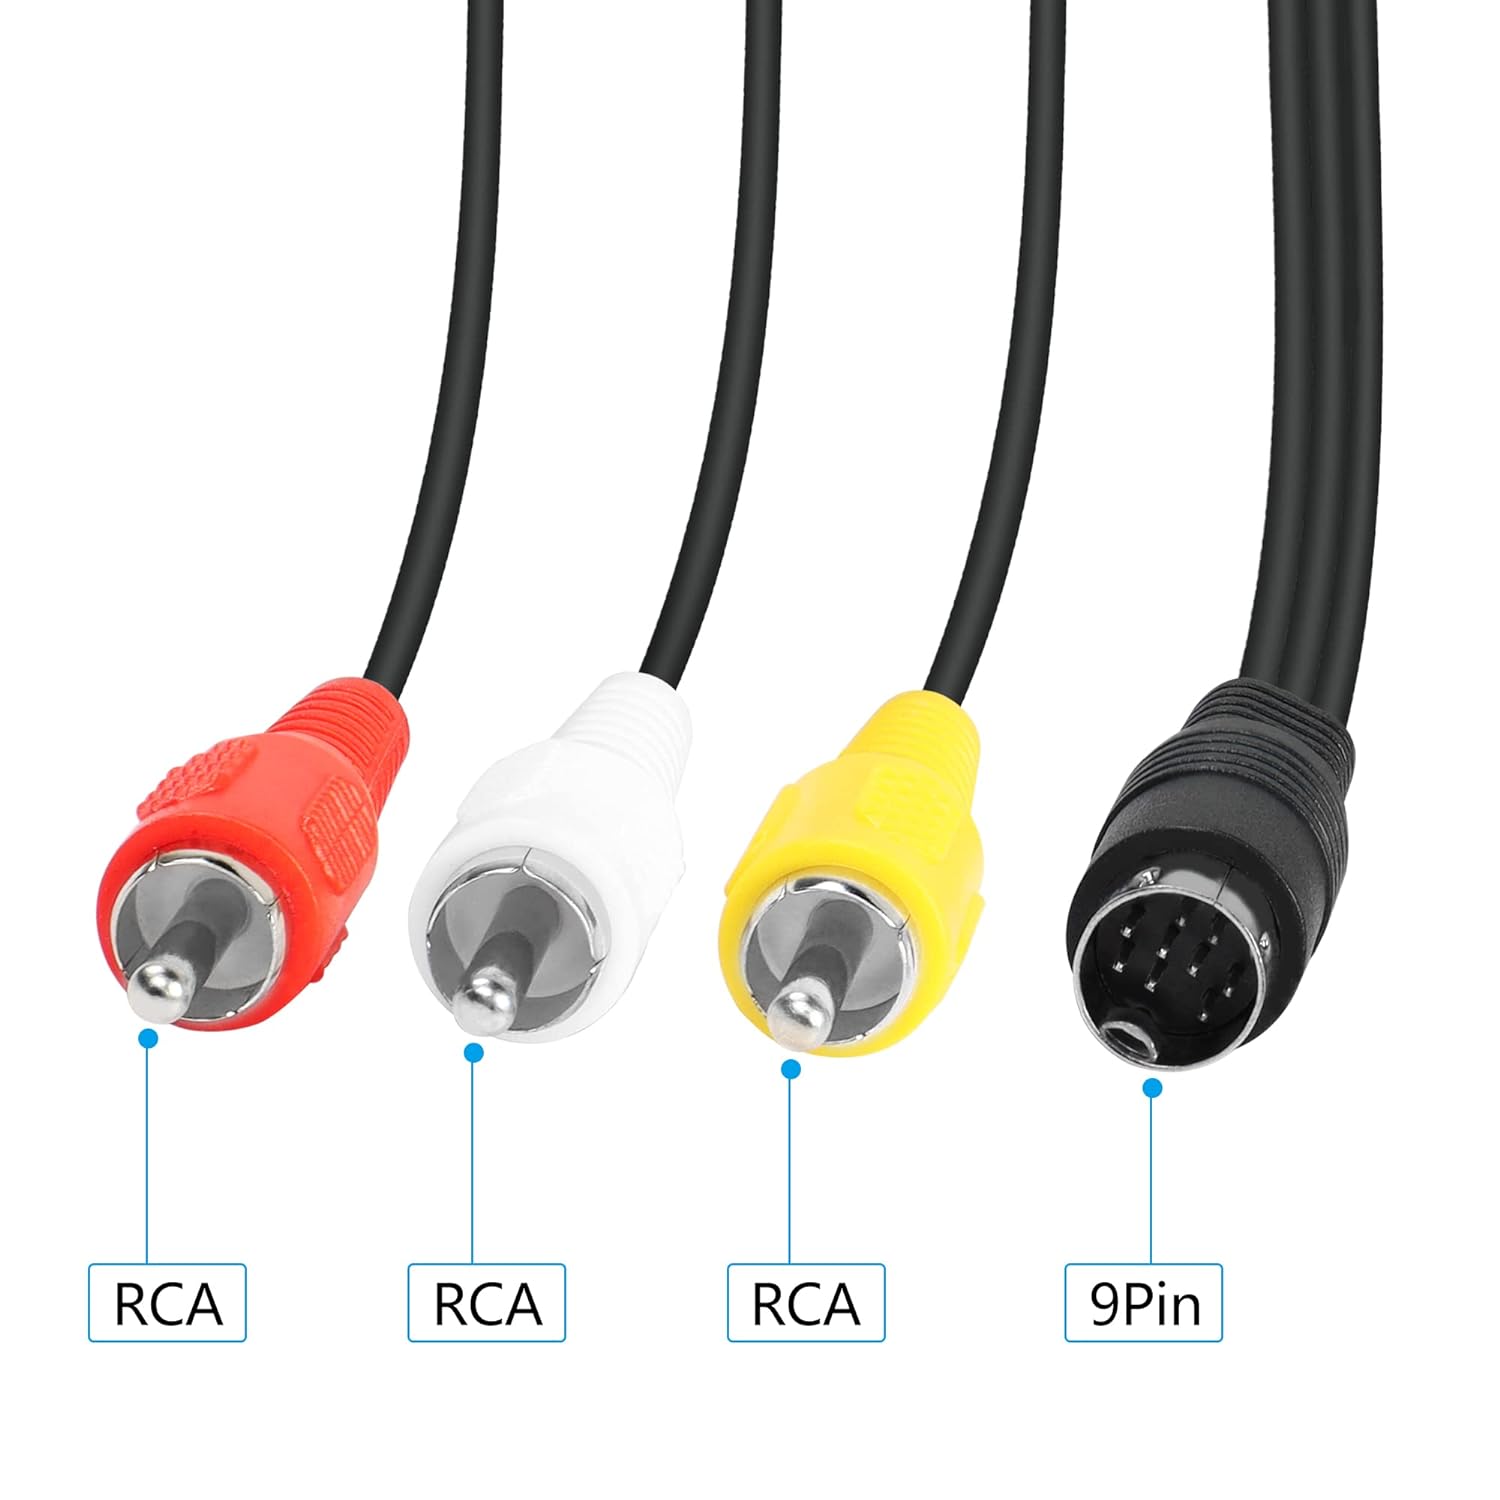 9 Pin S-Video to 3 RCA RGB TV HDTV Composite Audio Video Cable 1.8m